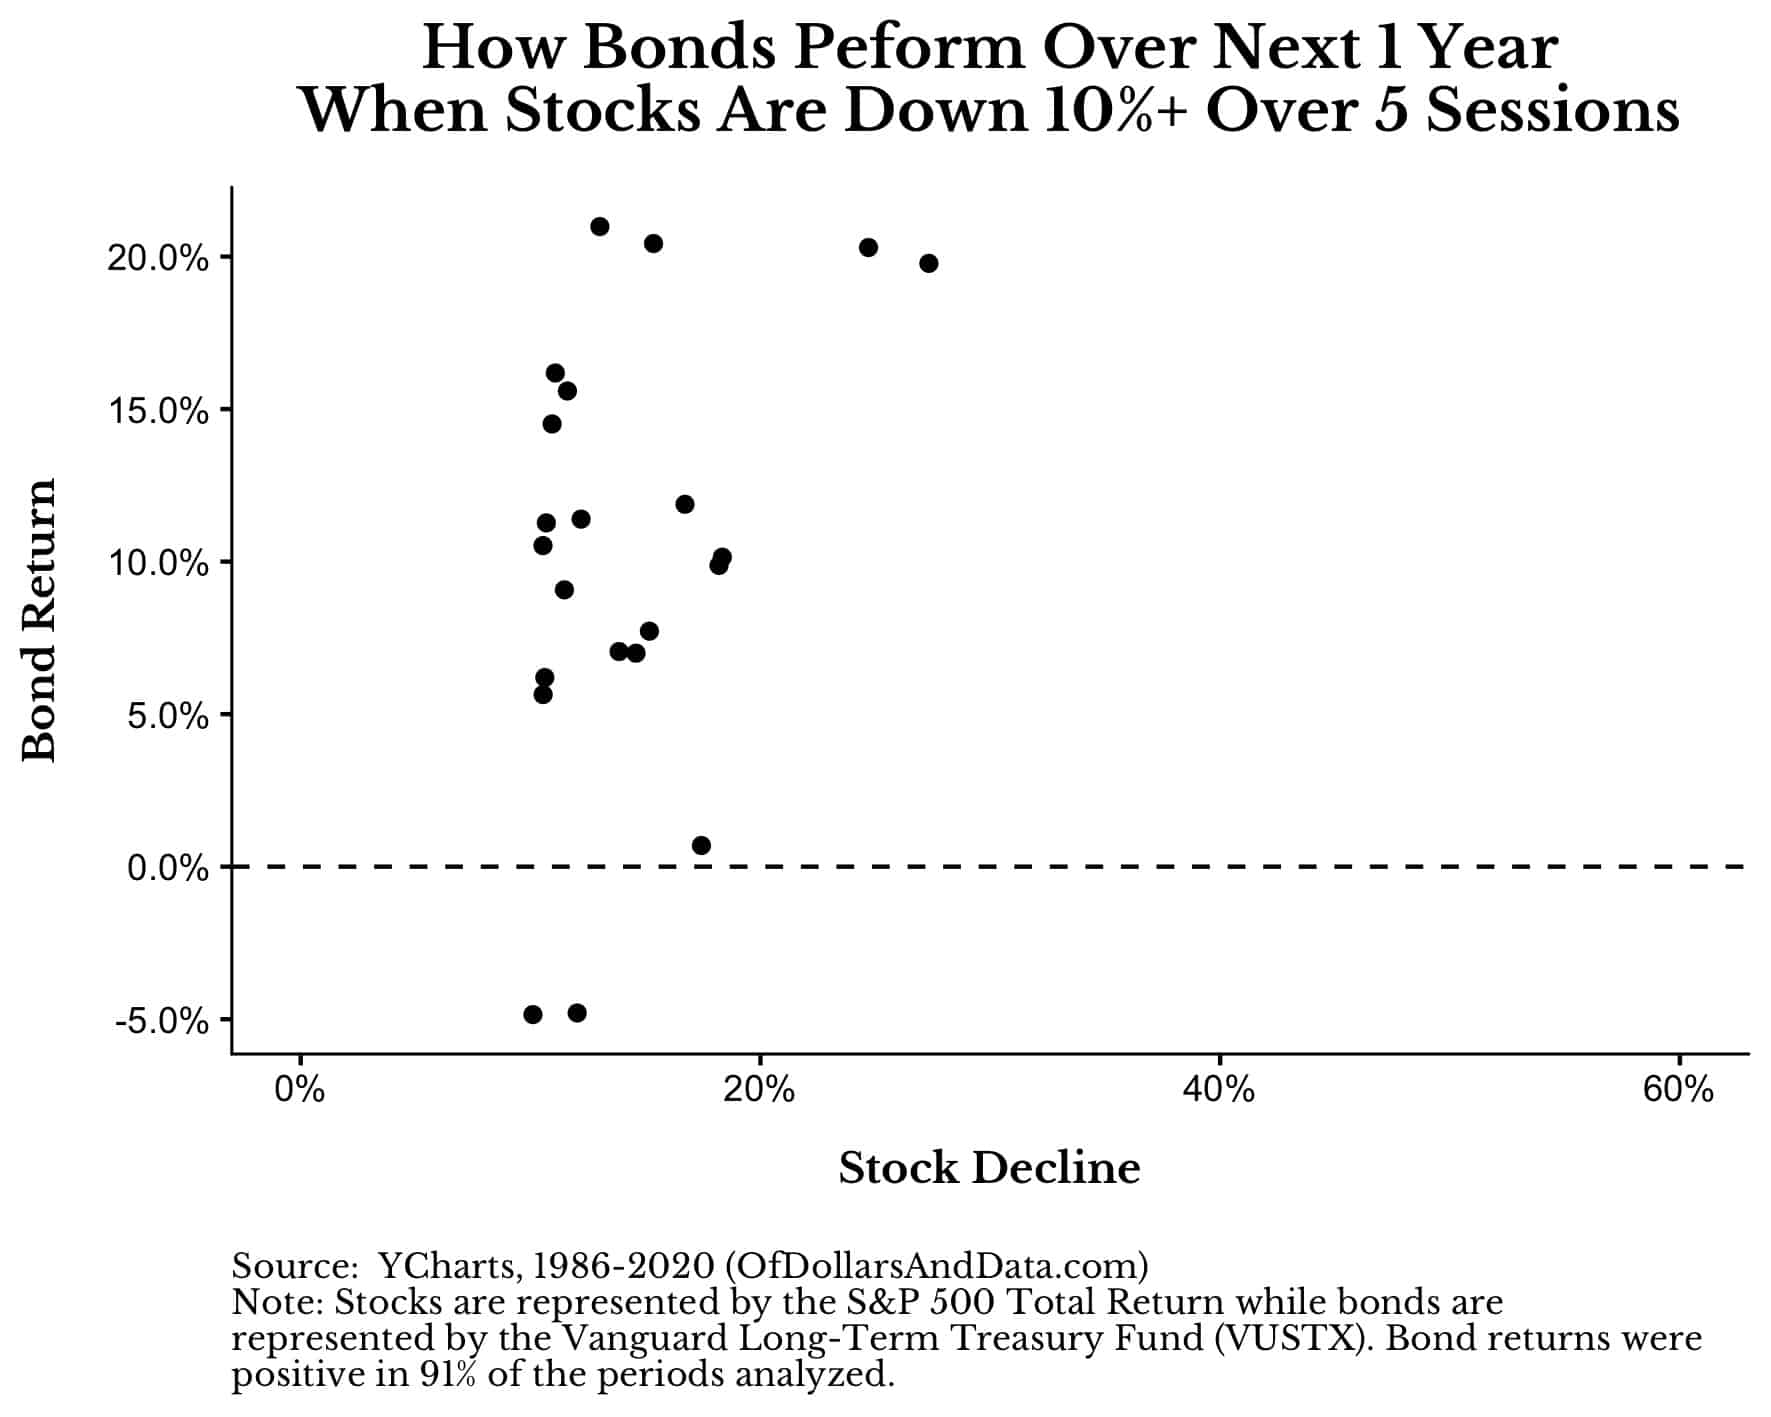 How bond perform over the next 5 sessions when U.S. stocks are down 10% or more